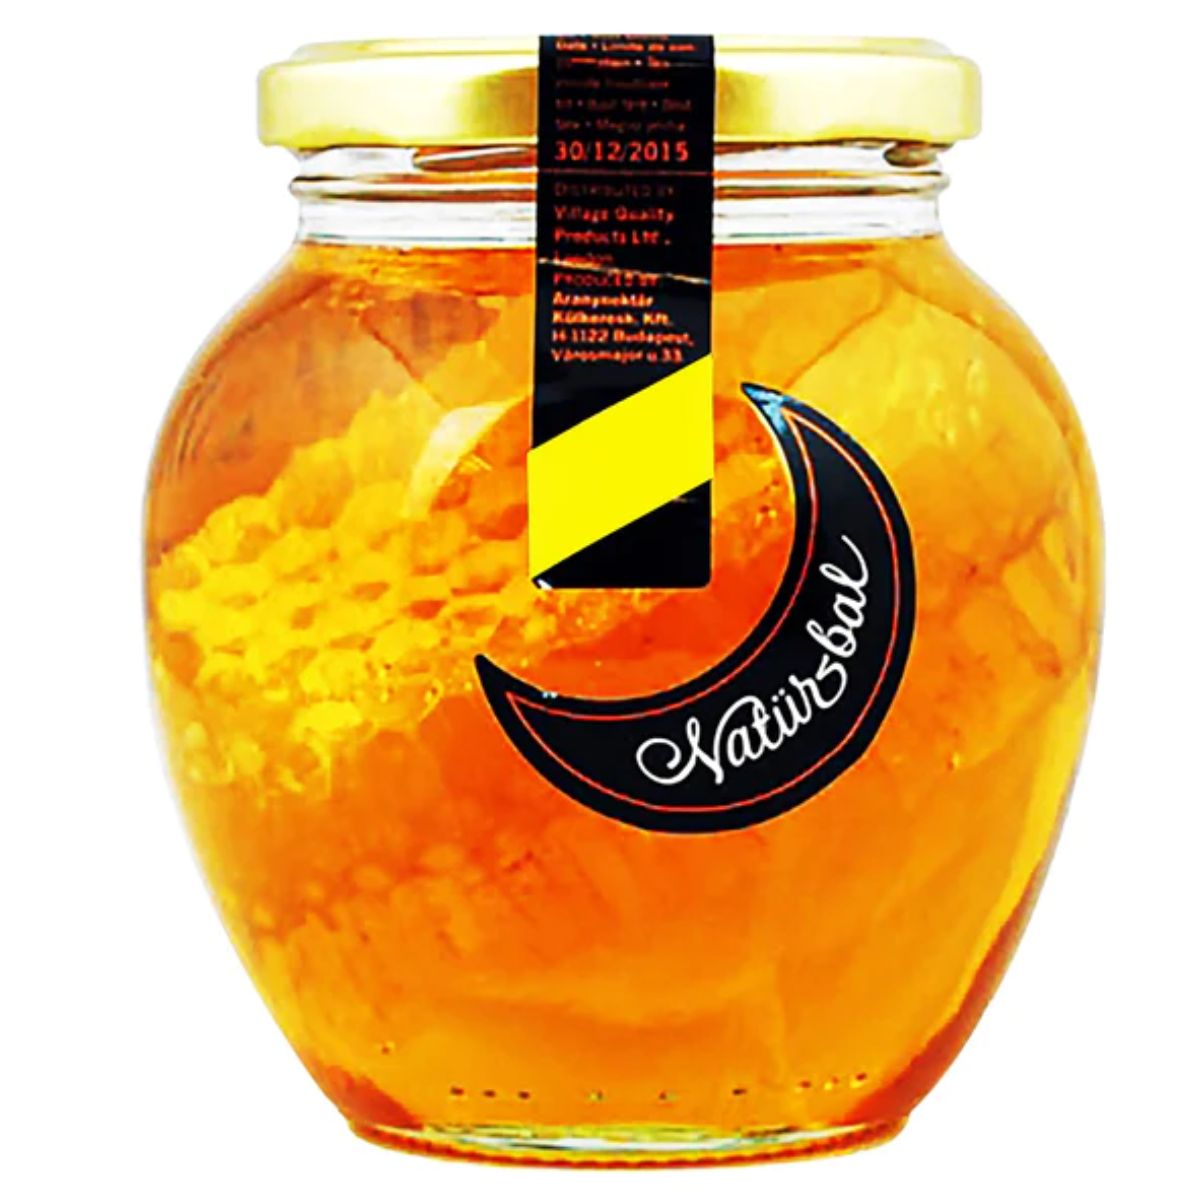 A jar of Naturbal - Syrup With Comb Honey - 450g with a black and yellow label.